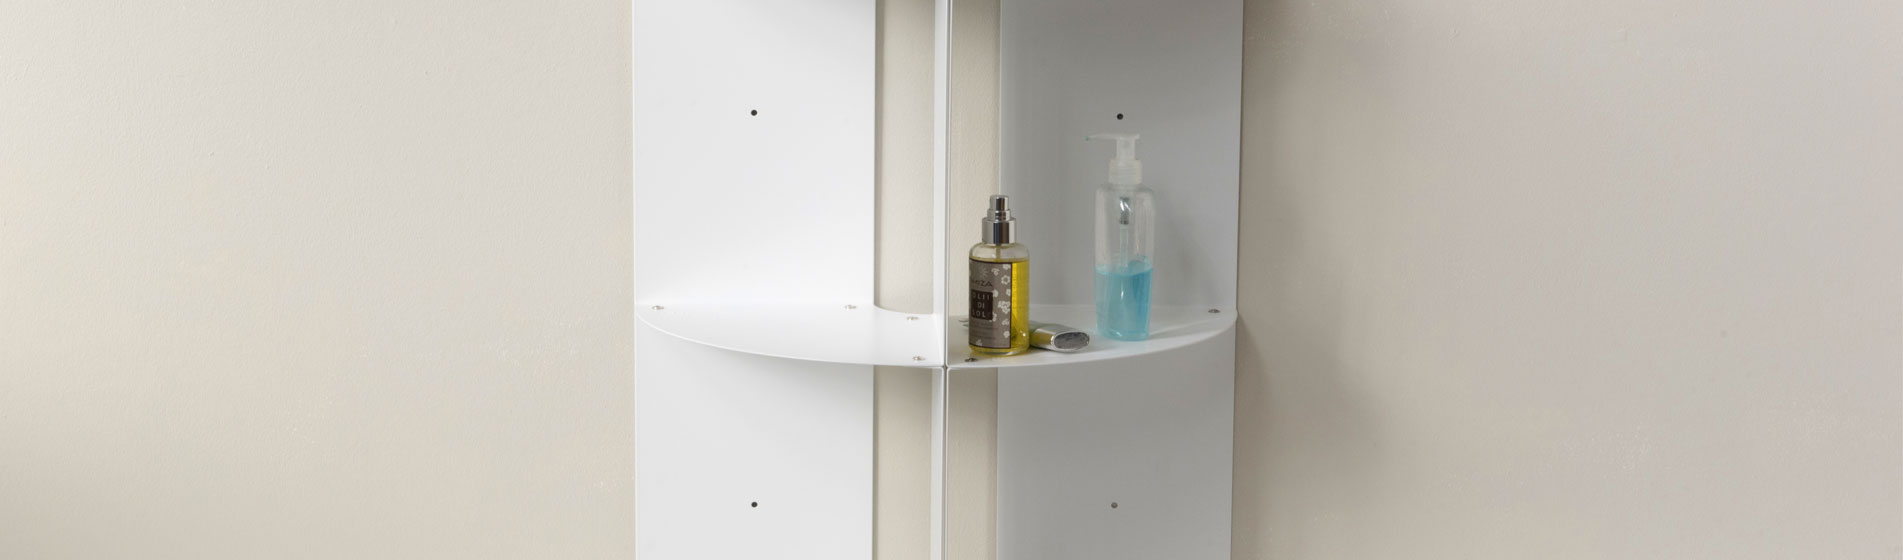 Etagere d'angle grise